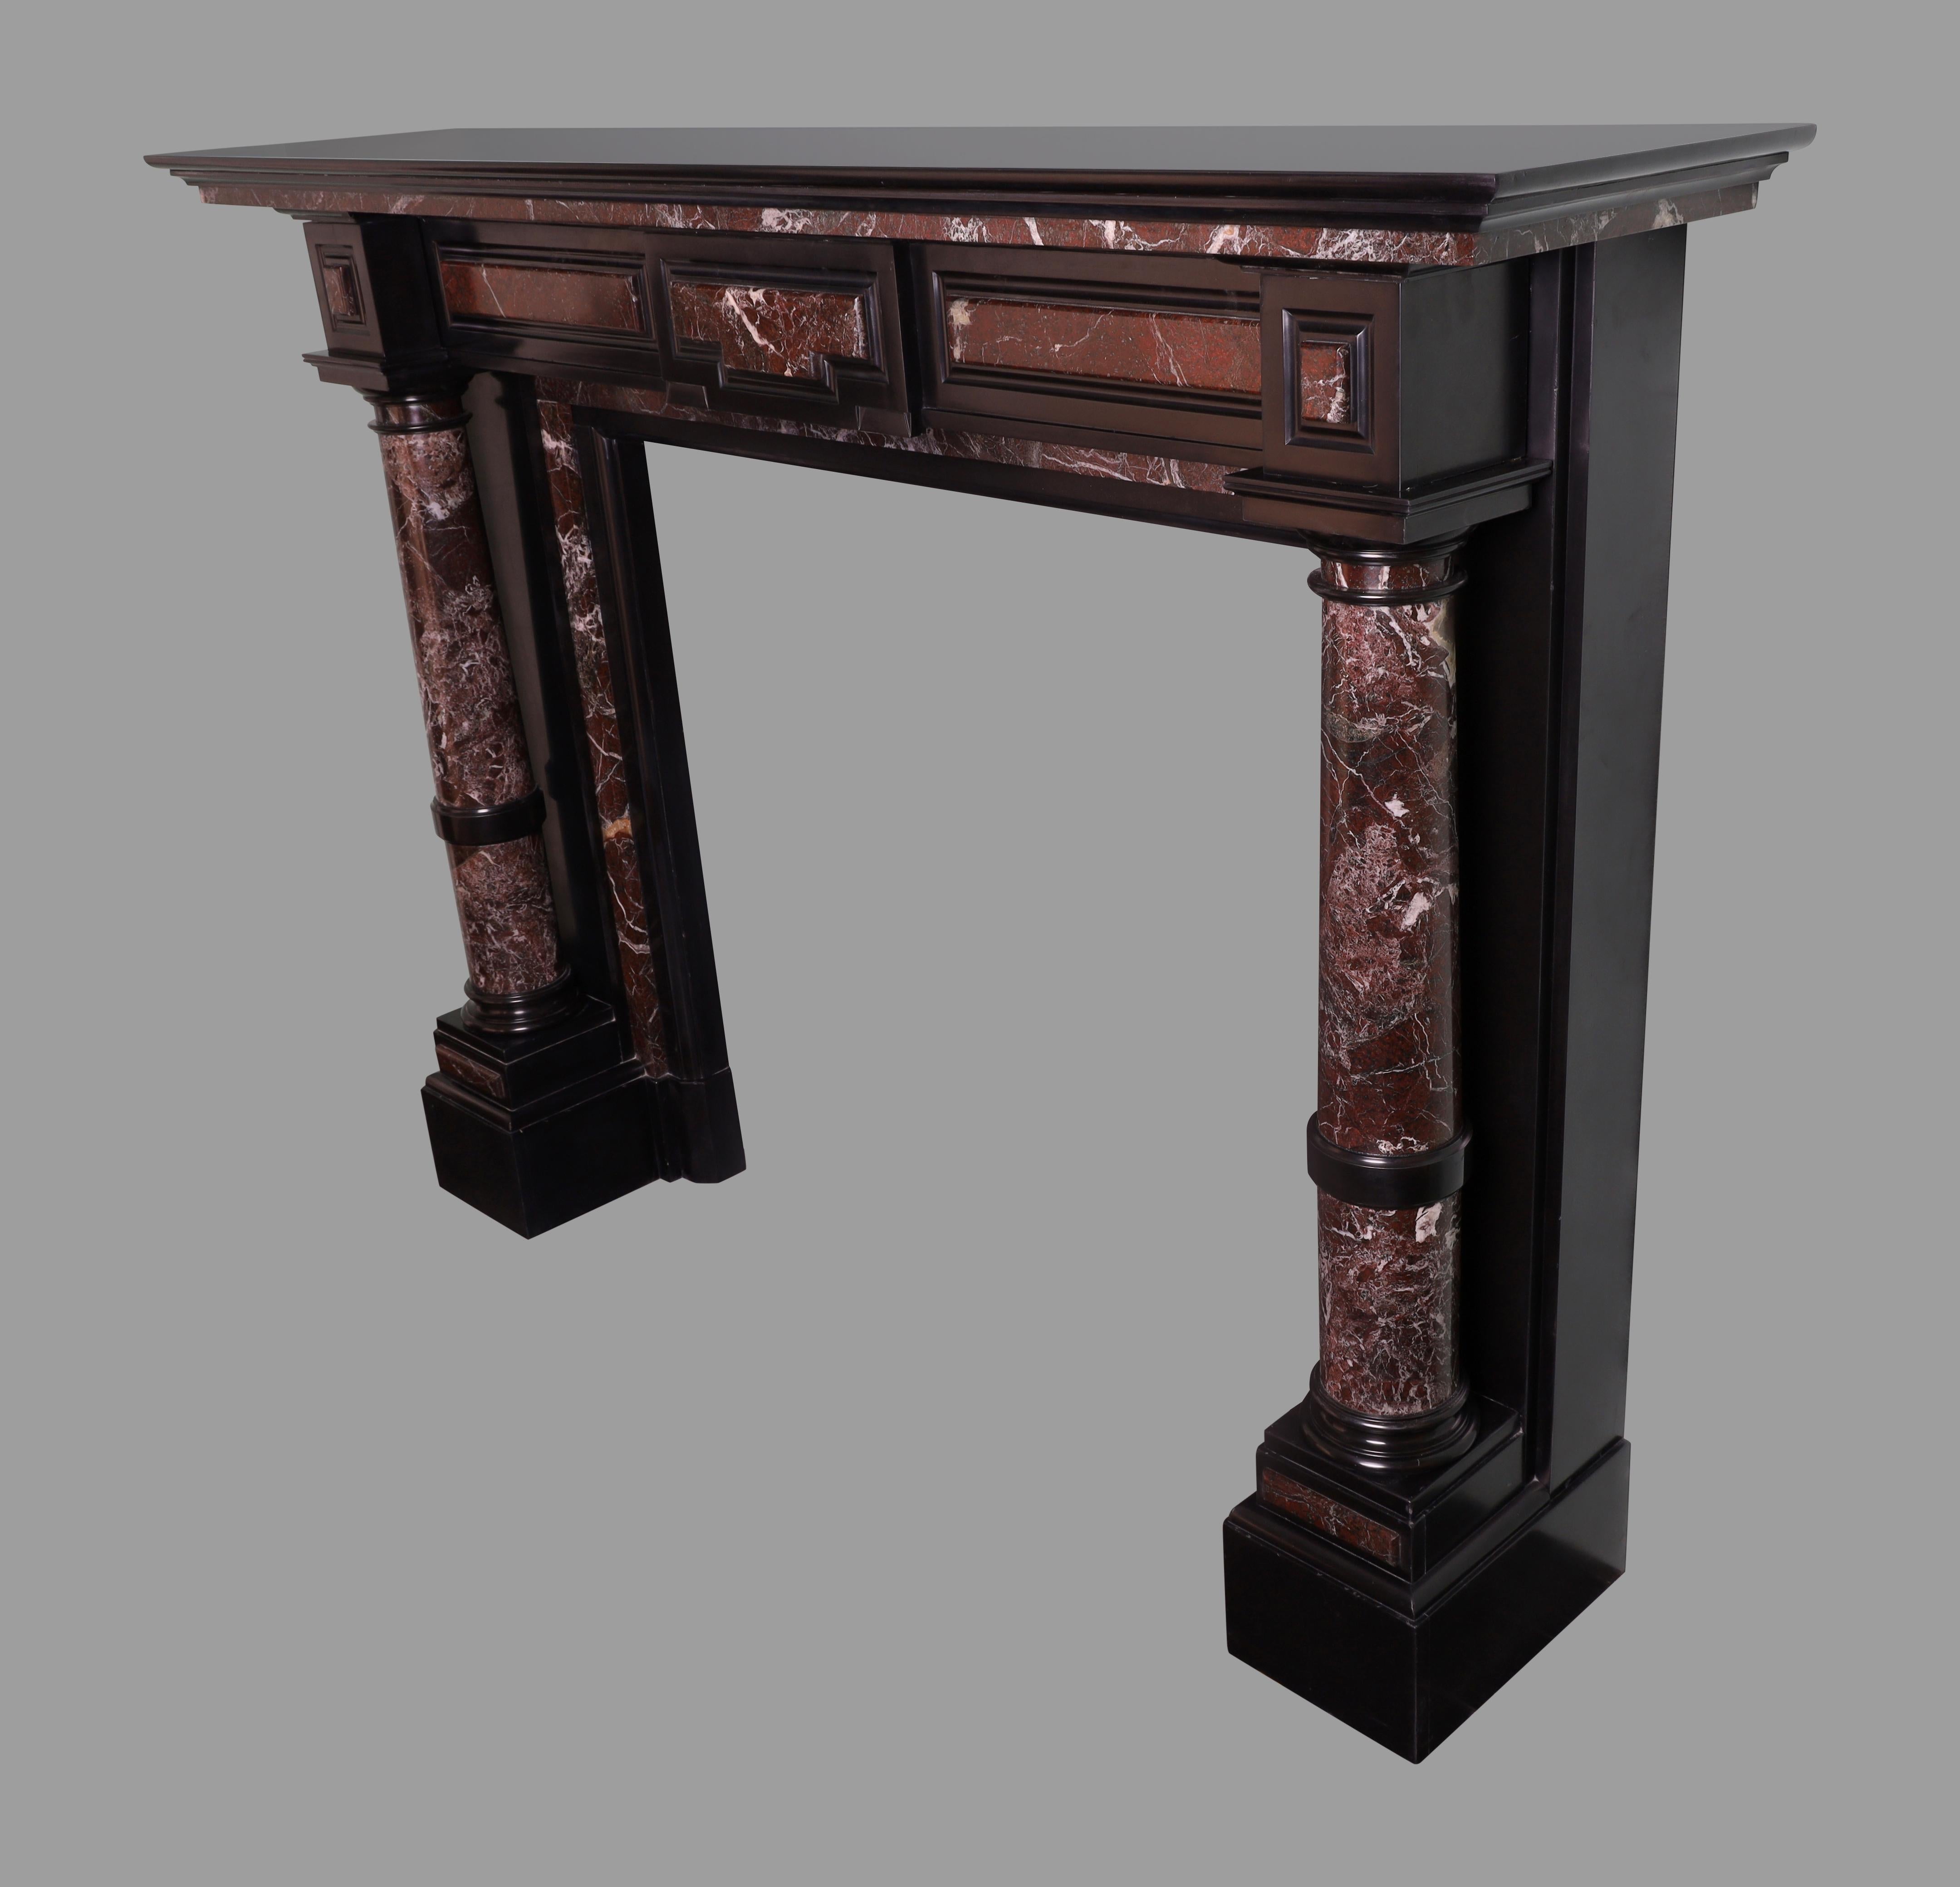 A magnificent polished Belgium Black and Rosso Levanto marble chimneypiece in the Renaissance manner. The moulded shelf set over a panelled frieze, supported by columns in Rosso Levanto with Belgium Black collar detail and large plinth blocks.